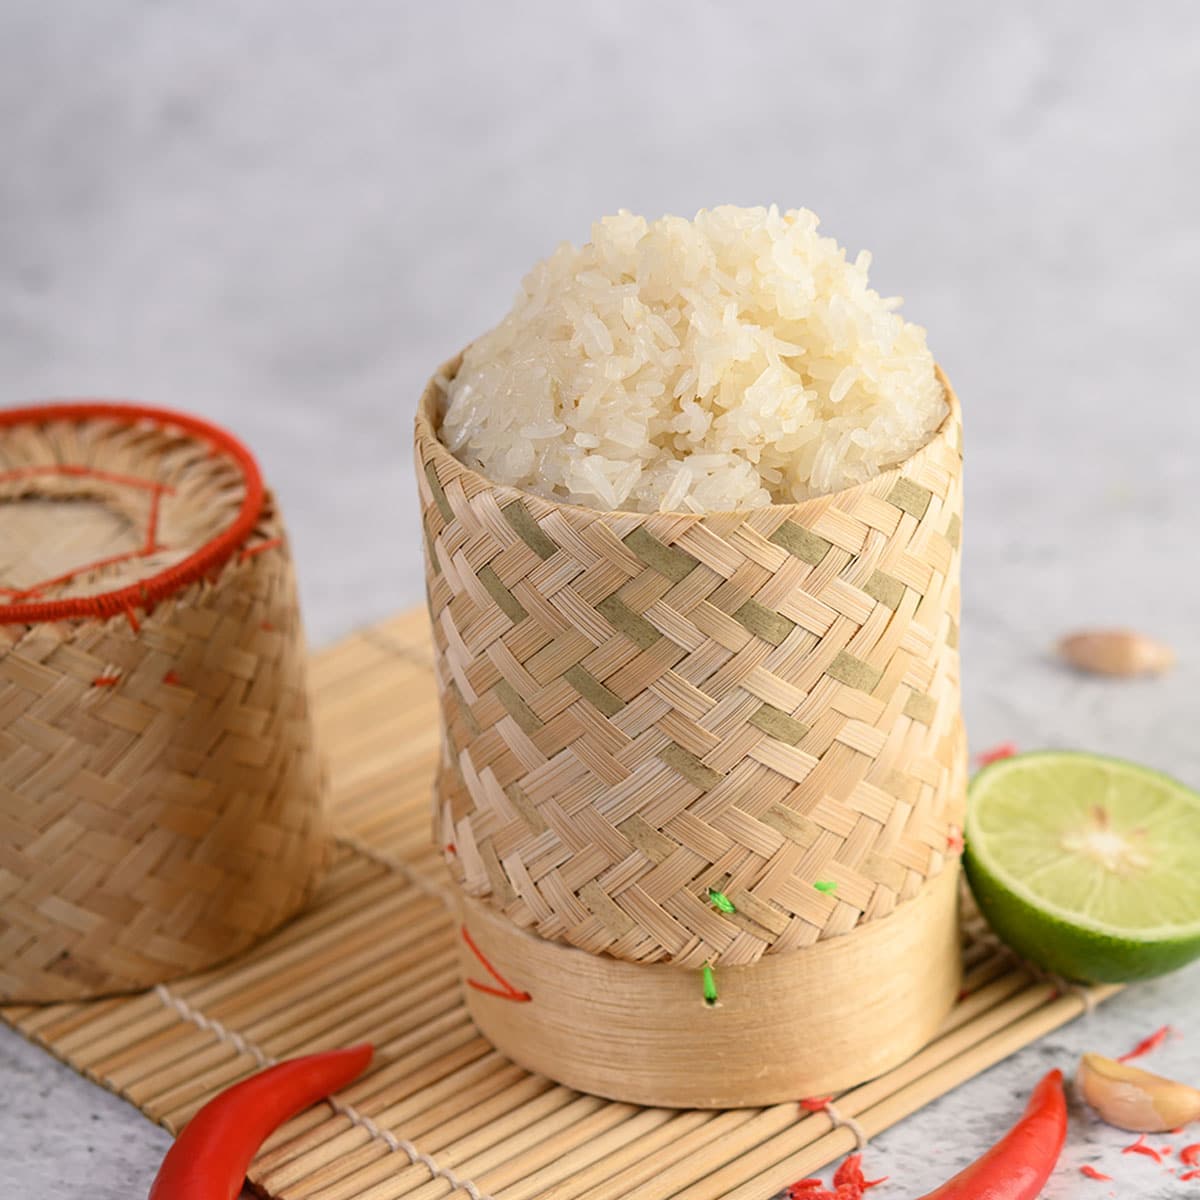 Steaming is by far the best way to reheat sticky rice. All you have to do is prepare your steamer, fill some water and bring it to a boil. Once boiling, turn it down to simmer.